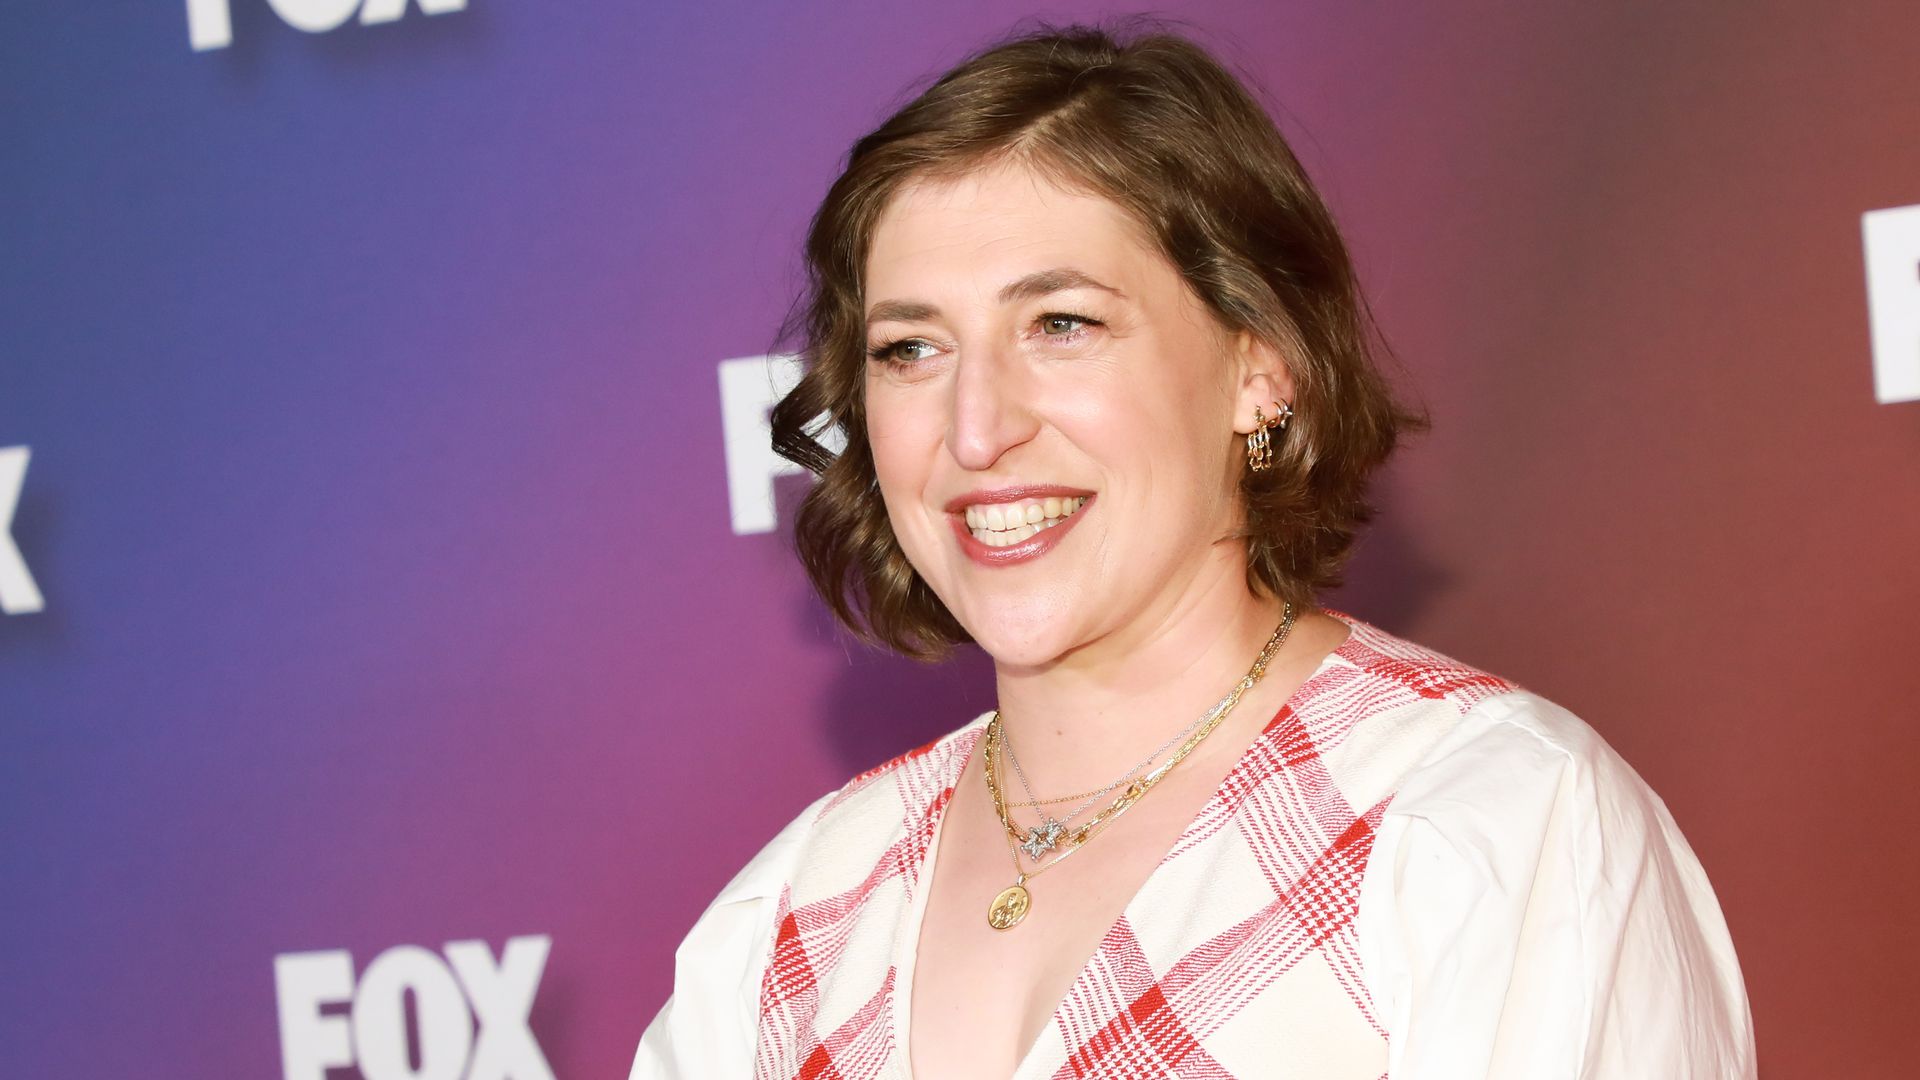 Mayim Bialik attends the 2022 Fox Upfront on May 16, 2022.